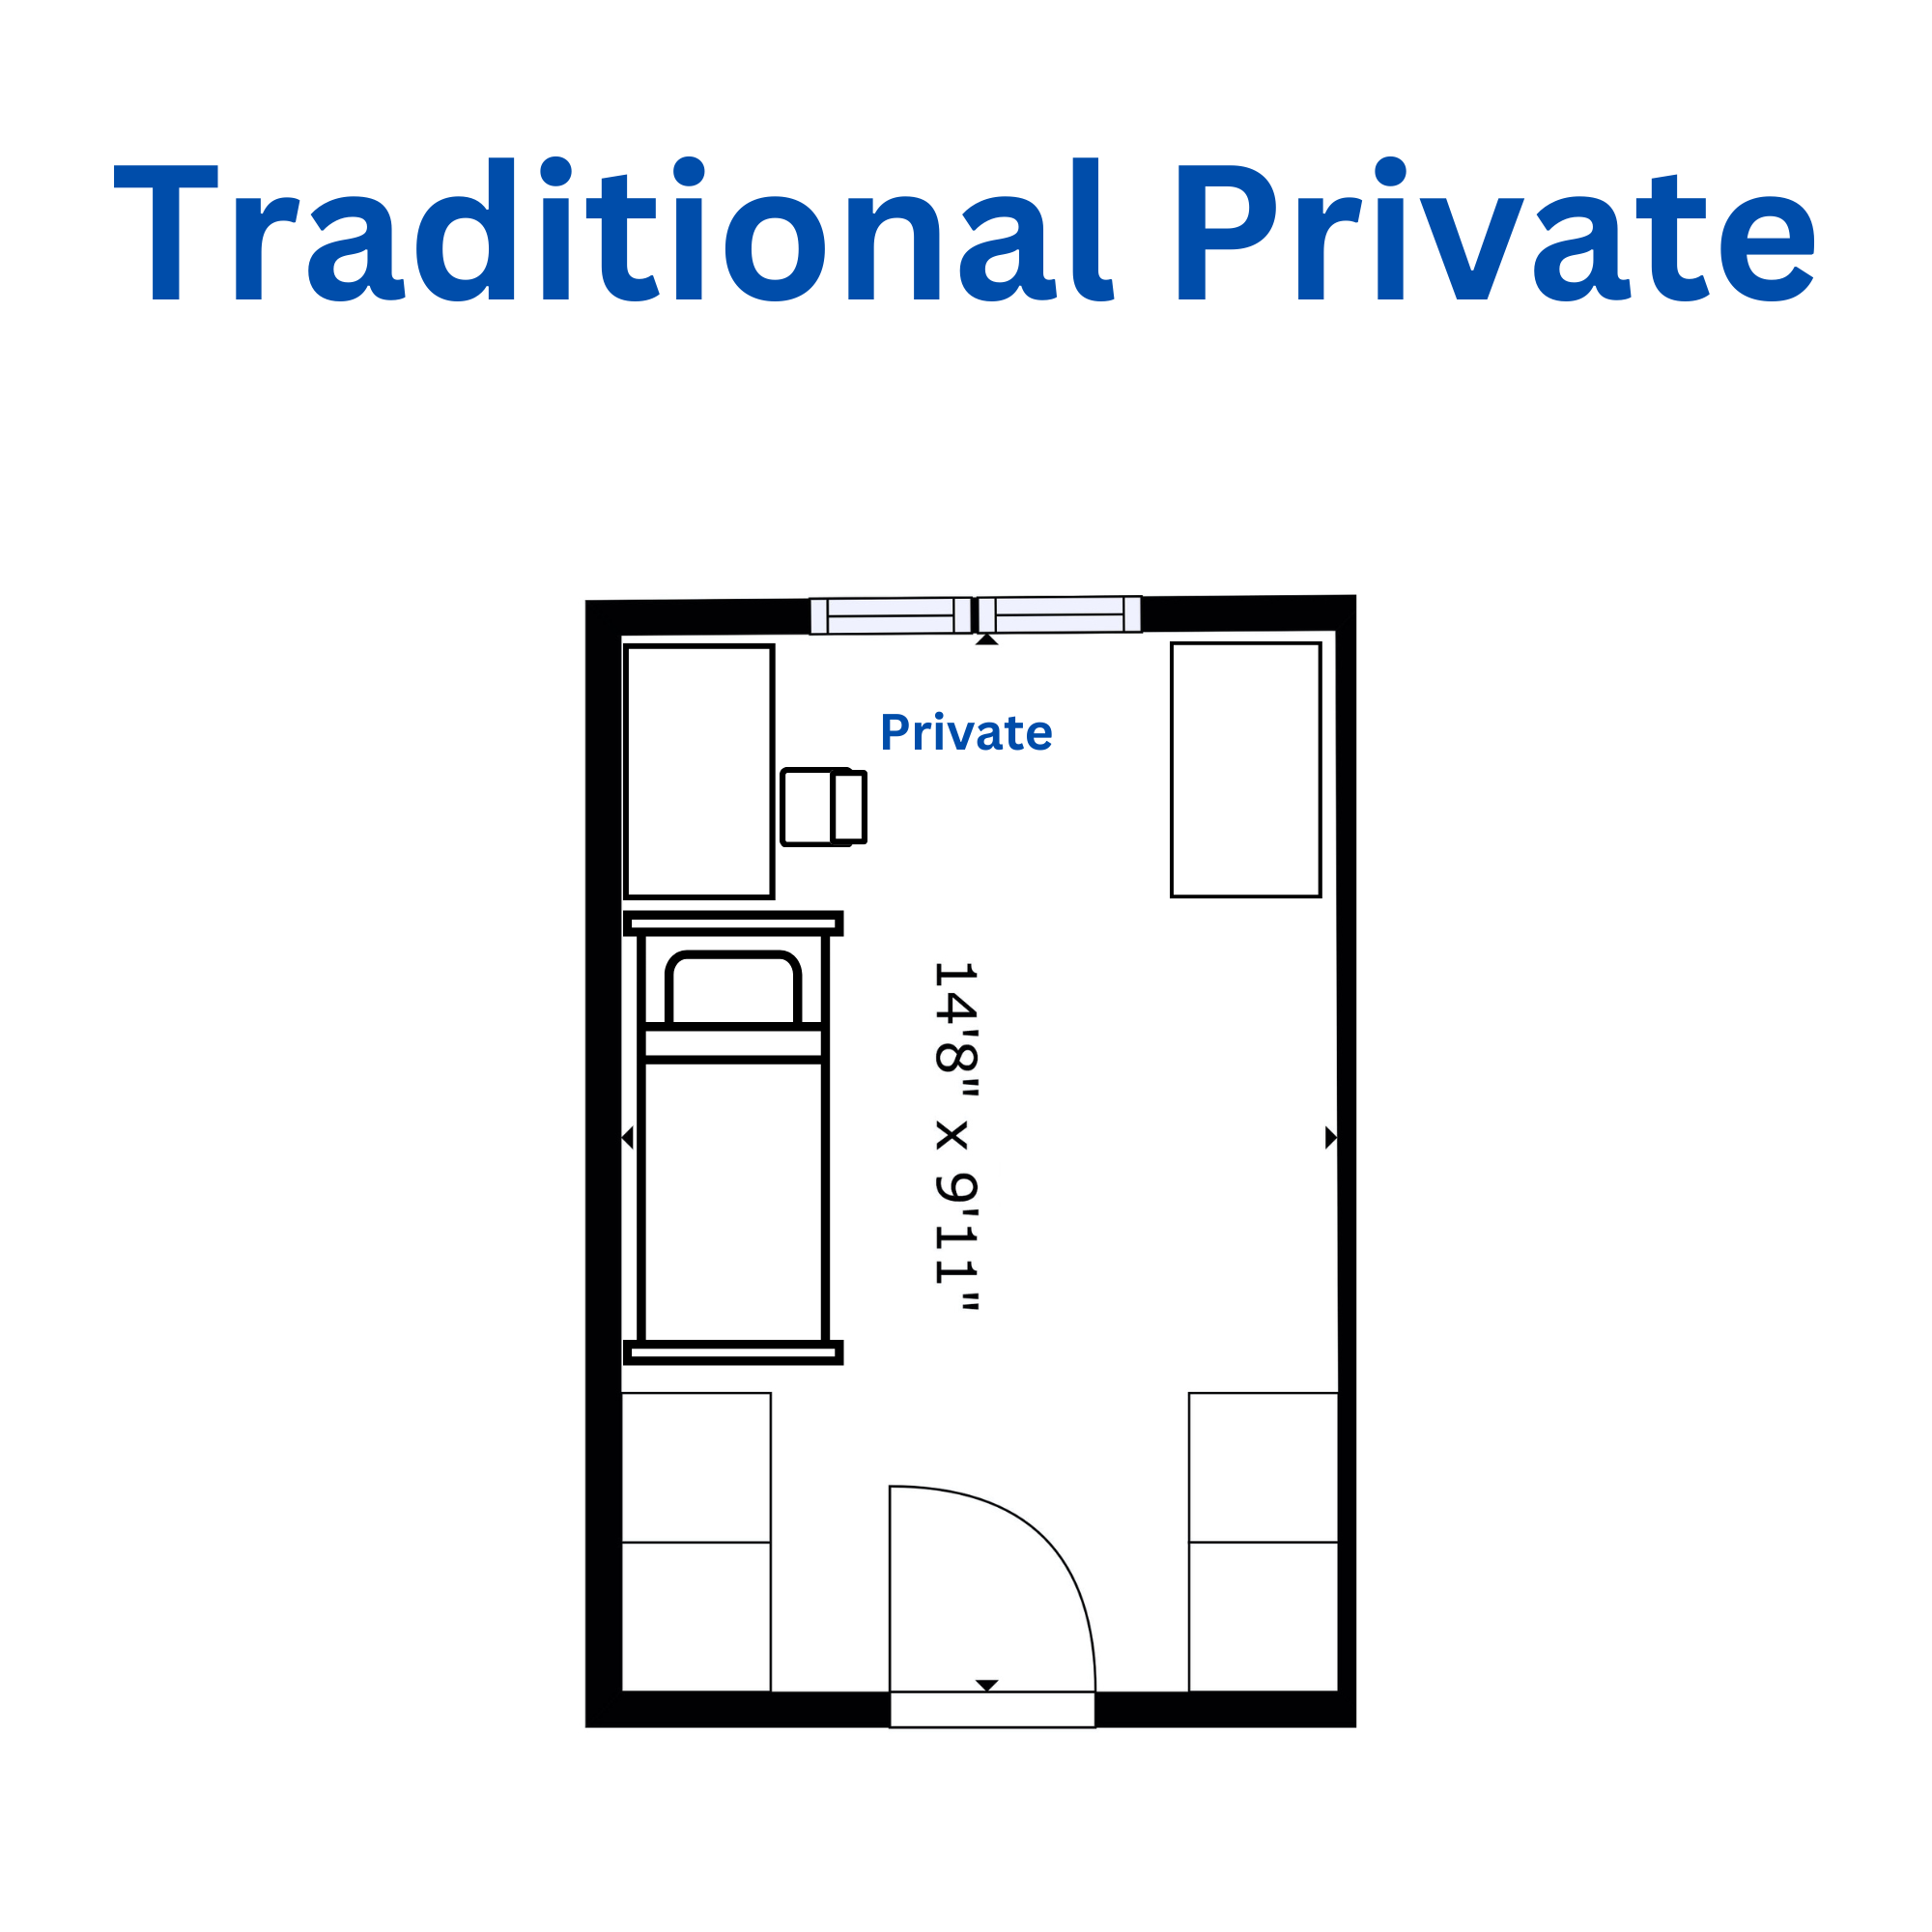 Traditional Private Floor Plan